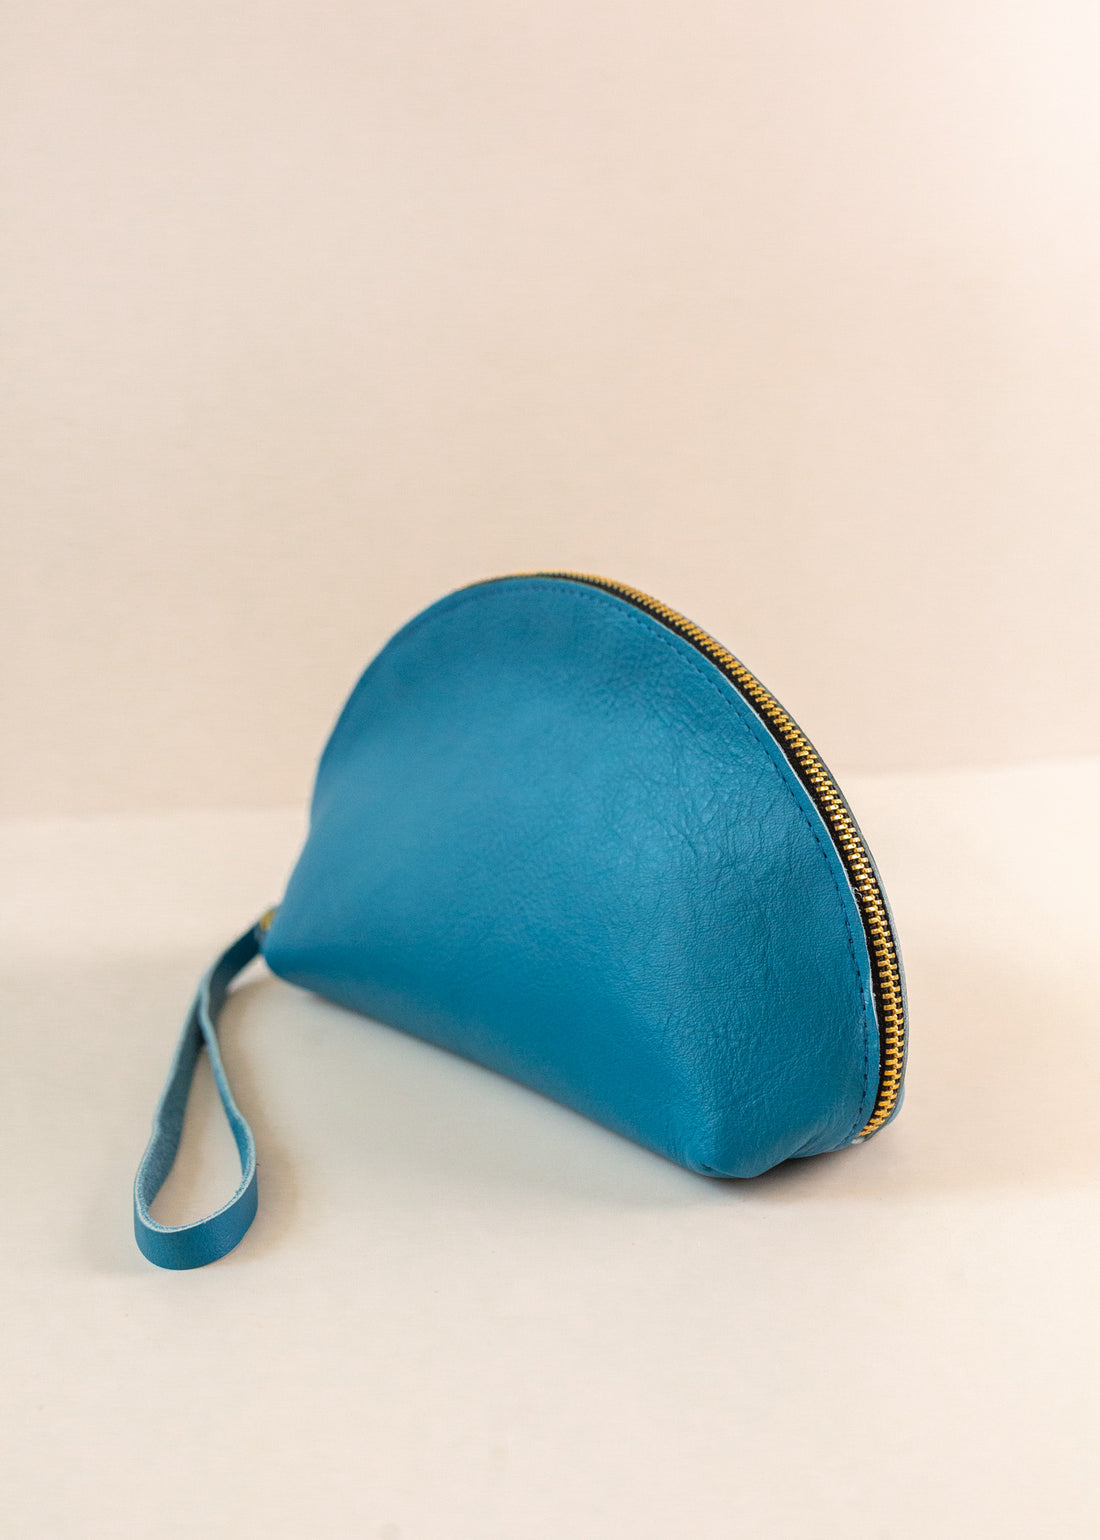 Azure, or blue, colored shell bag standing up on a light pink background with a short wrist handle